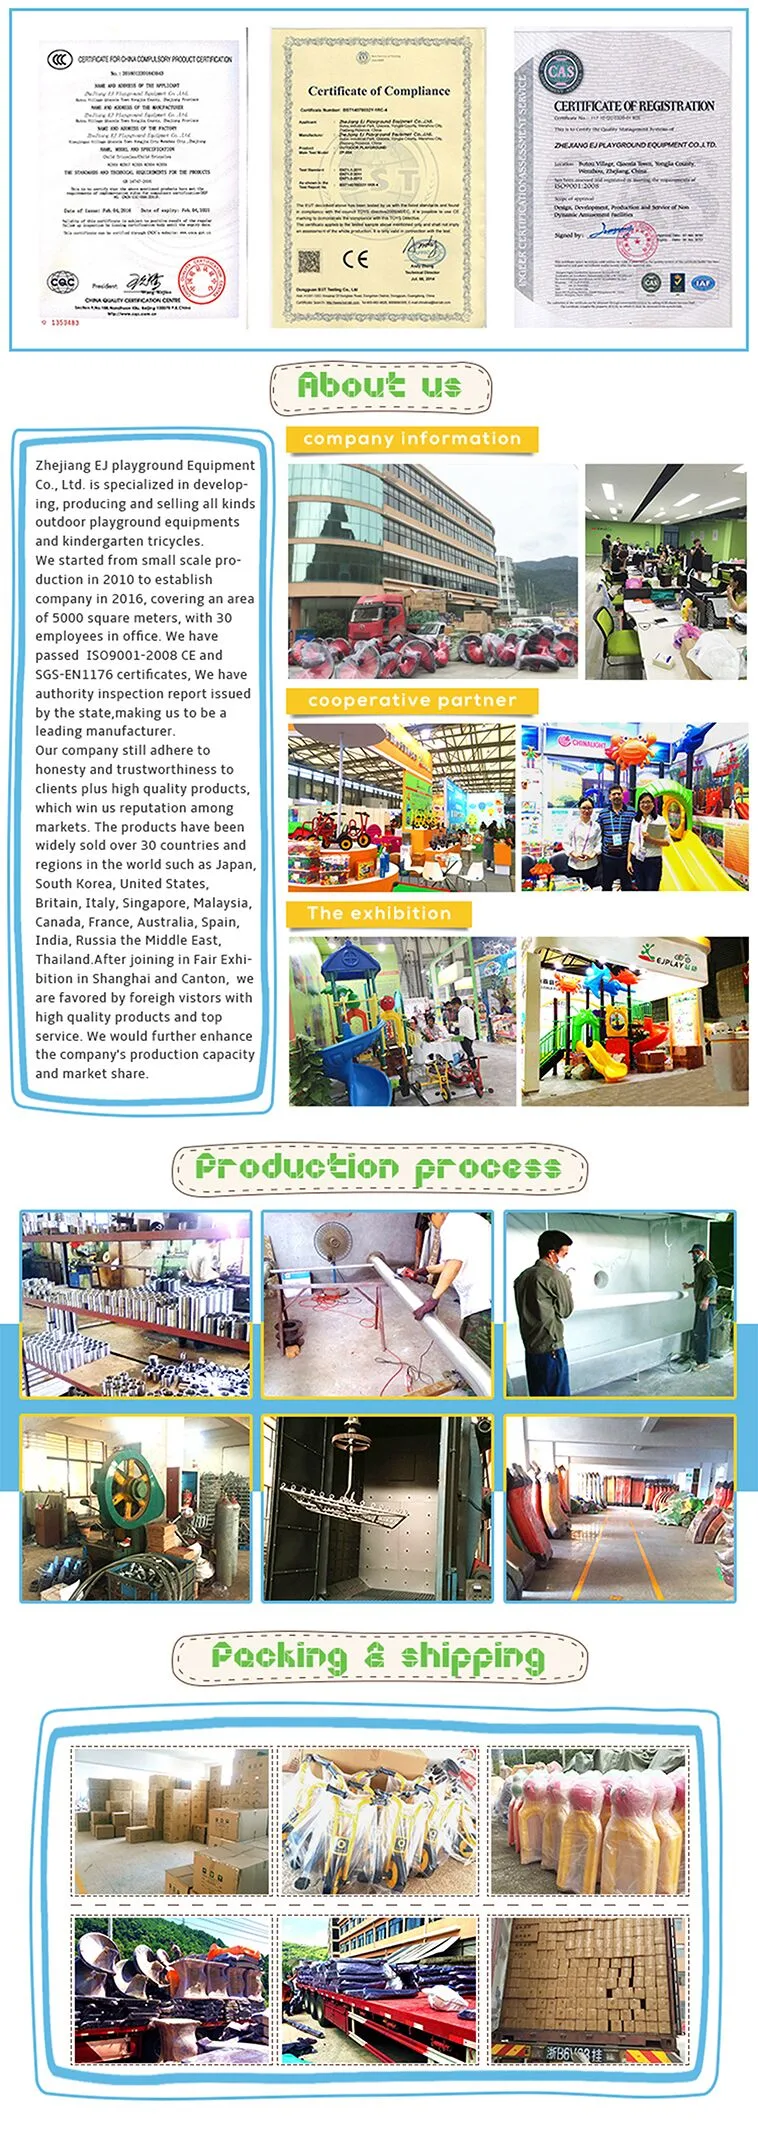 Special Design Outdoor Play Set for Kids Toys Equipments Play in Amusement Park